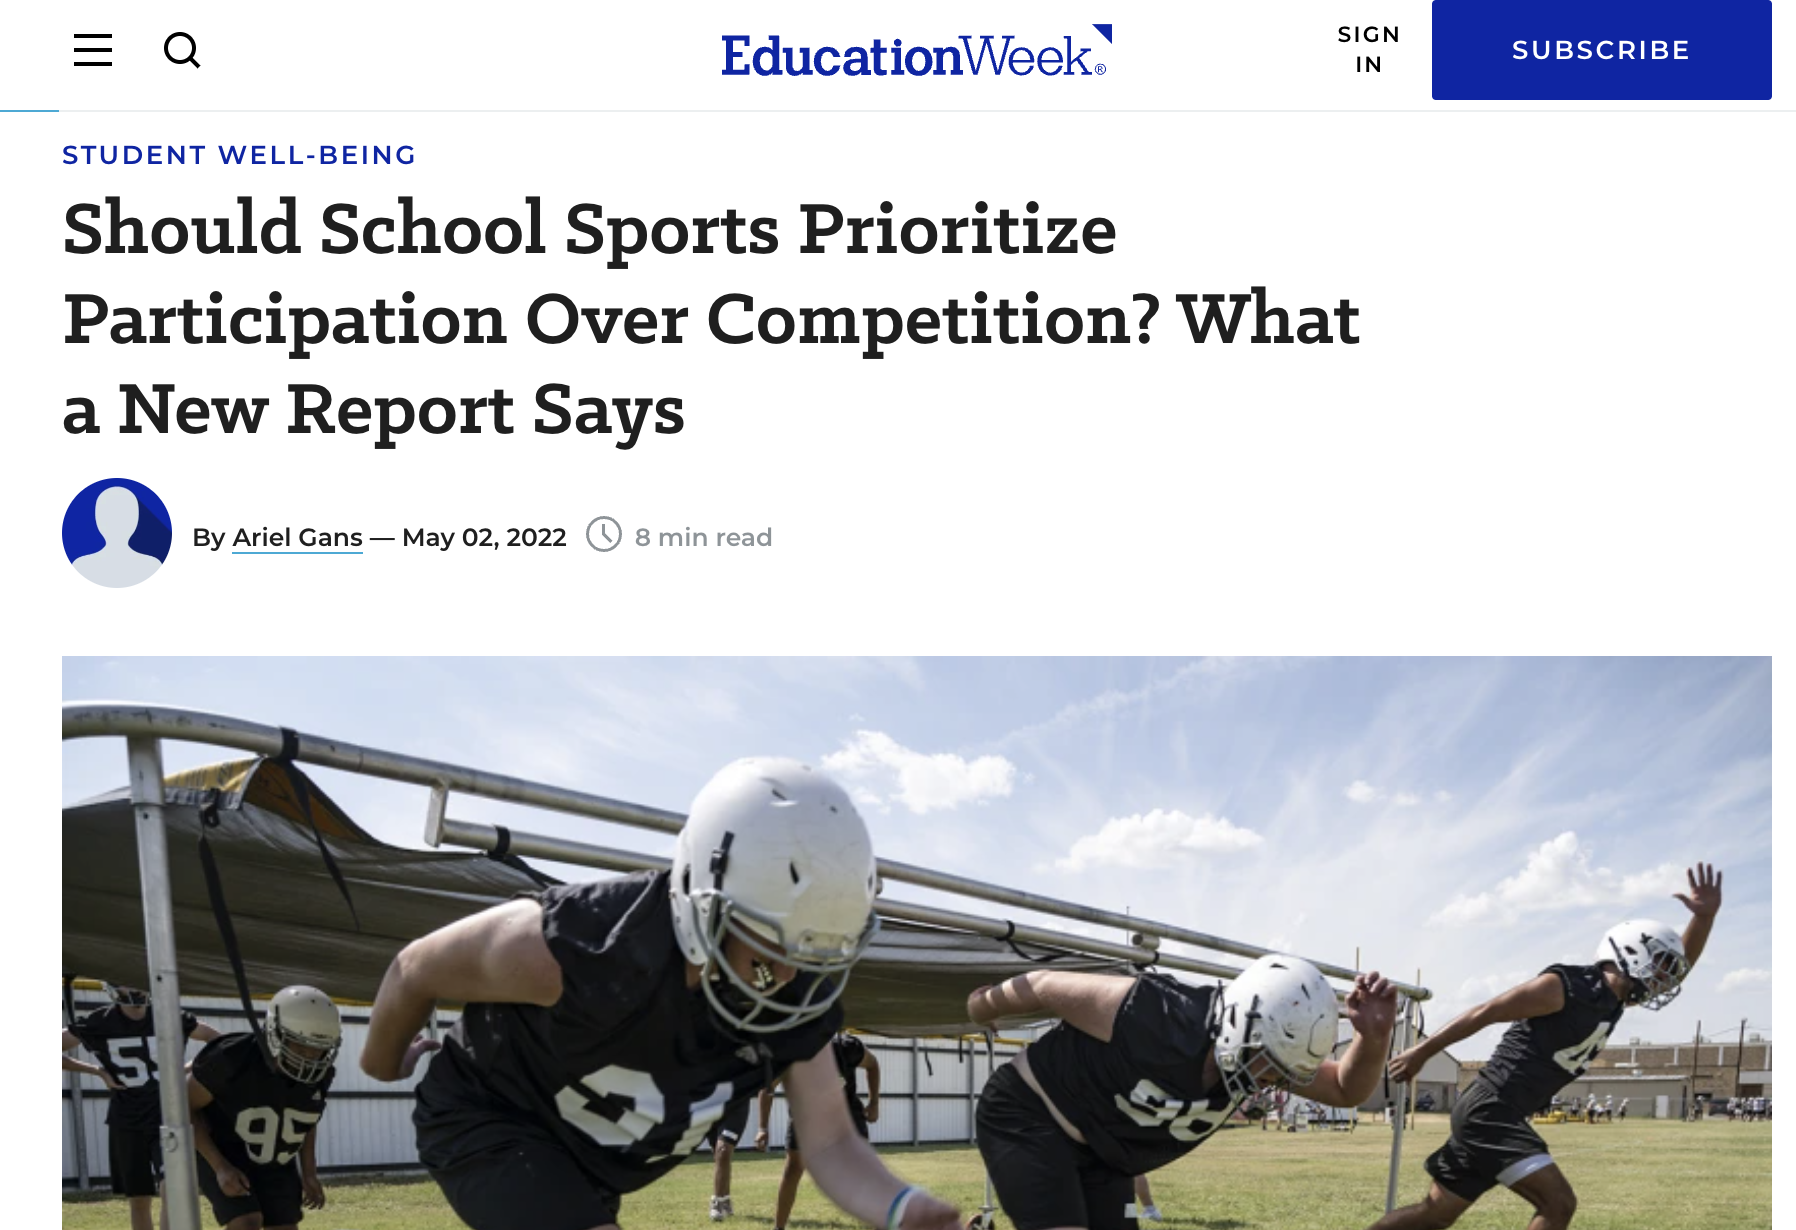 Should School Sports Prioritize Participation Over Competition?